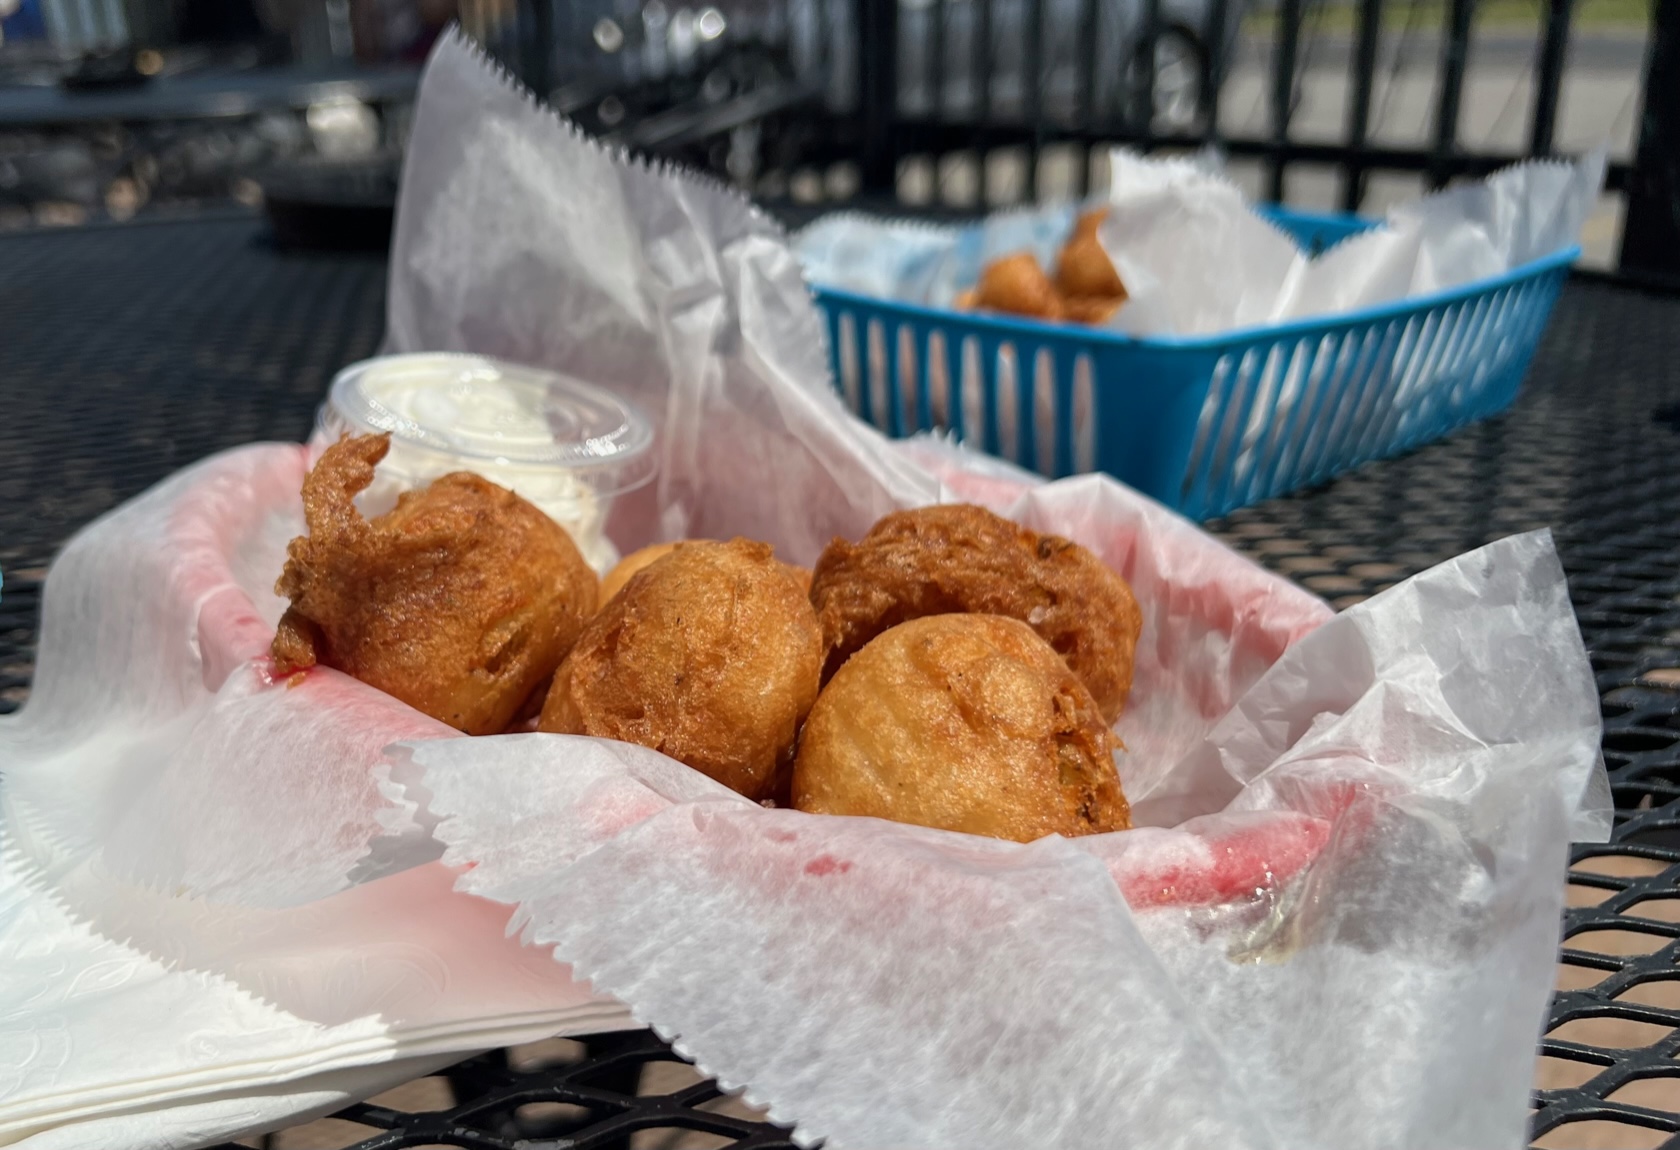 On an outside table at Boomerang's Bar & Grill, there is a parchment paper lined basket of boom balls, an appetizer of fried mashed potatoes. Photo by Alyssa Buckley.